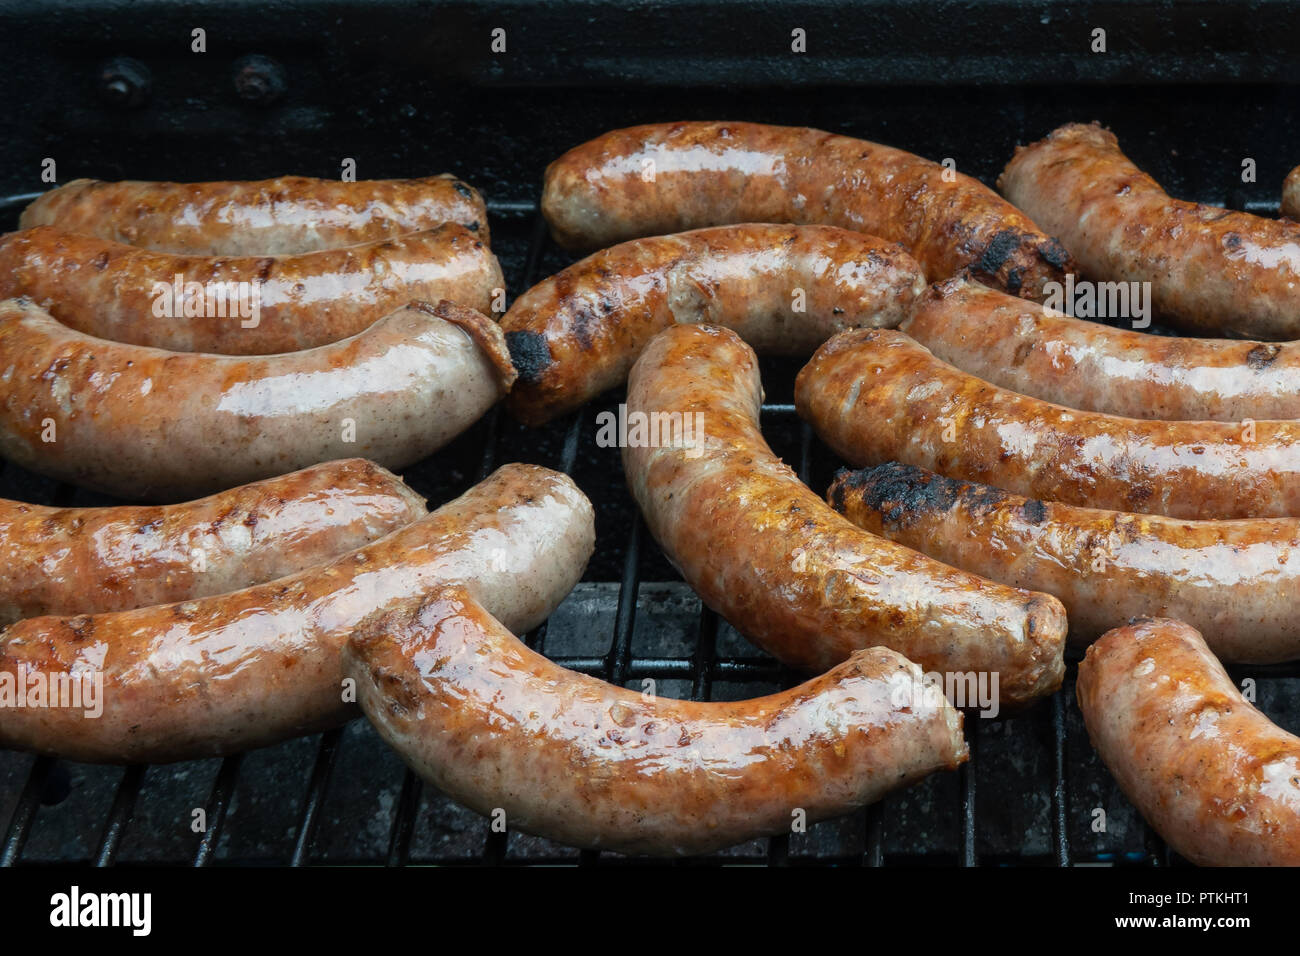 Pieces of pork sausage cooking on a gas grill. Stock Photo